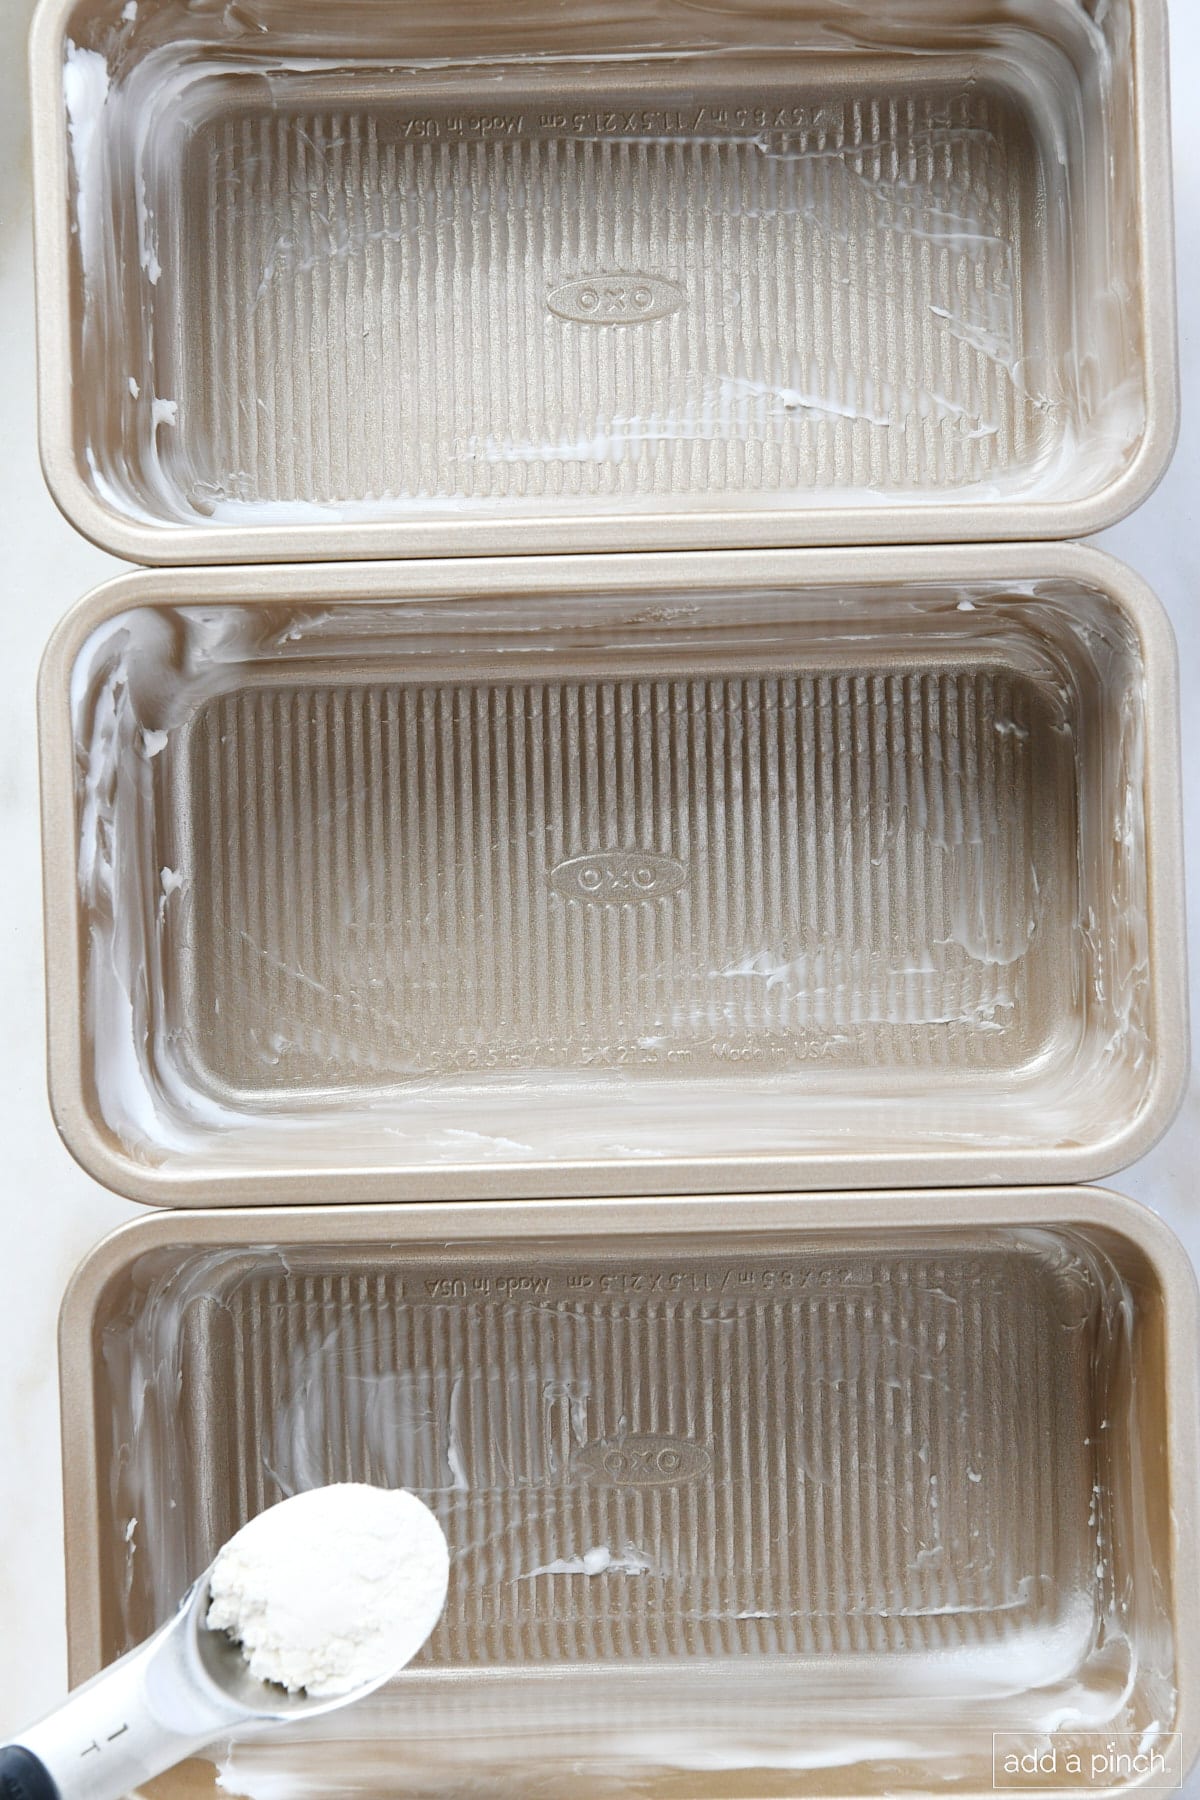 Three greased loaf pans about to have flour sprinkled inside to prep them for baking cakes.